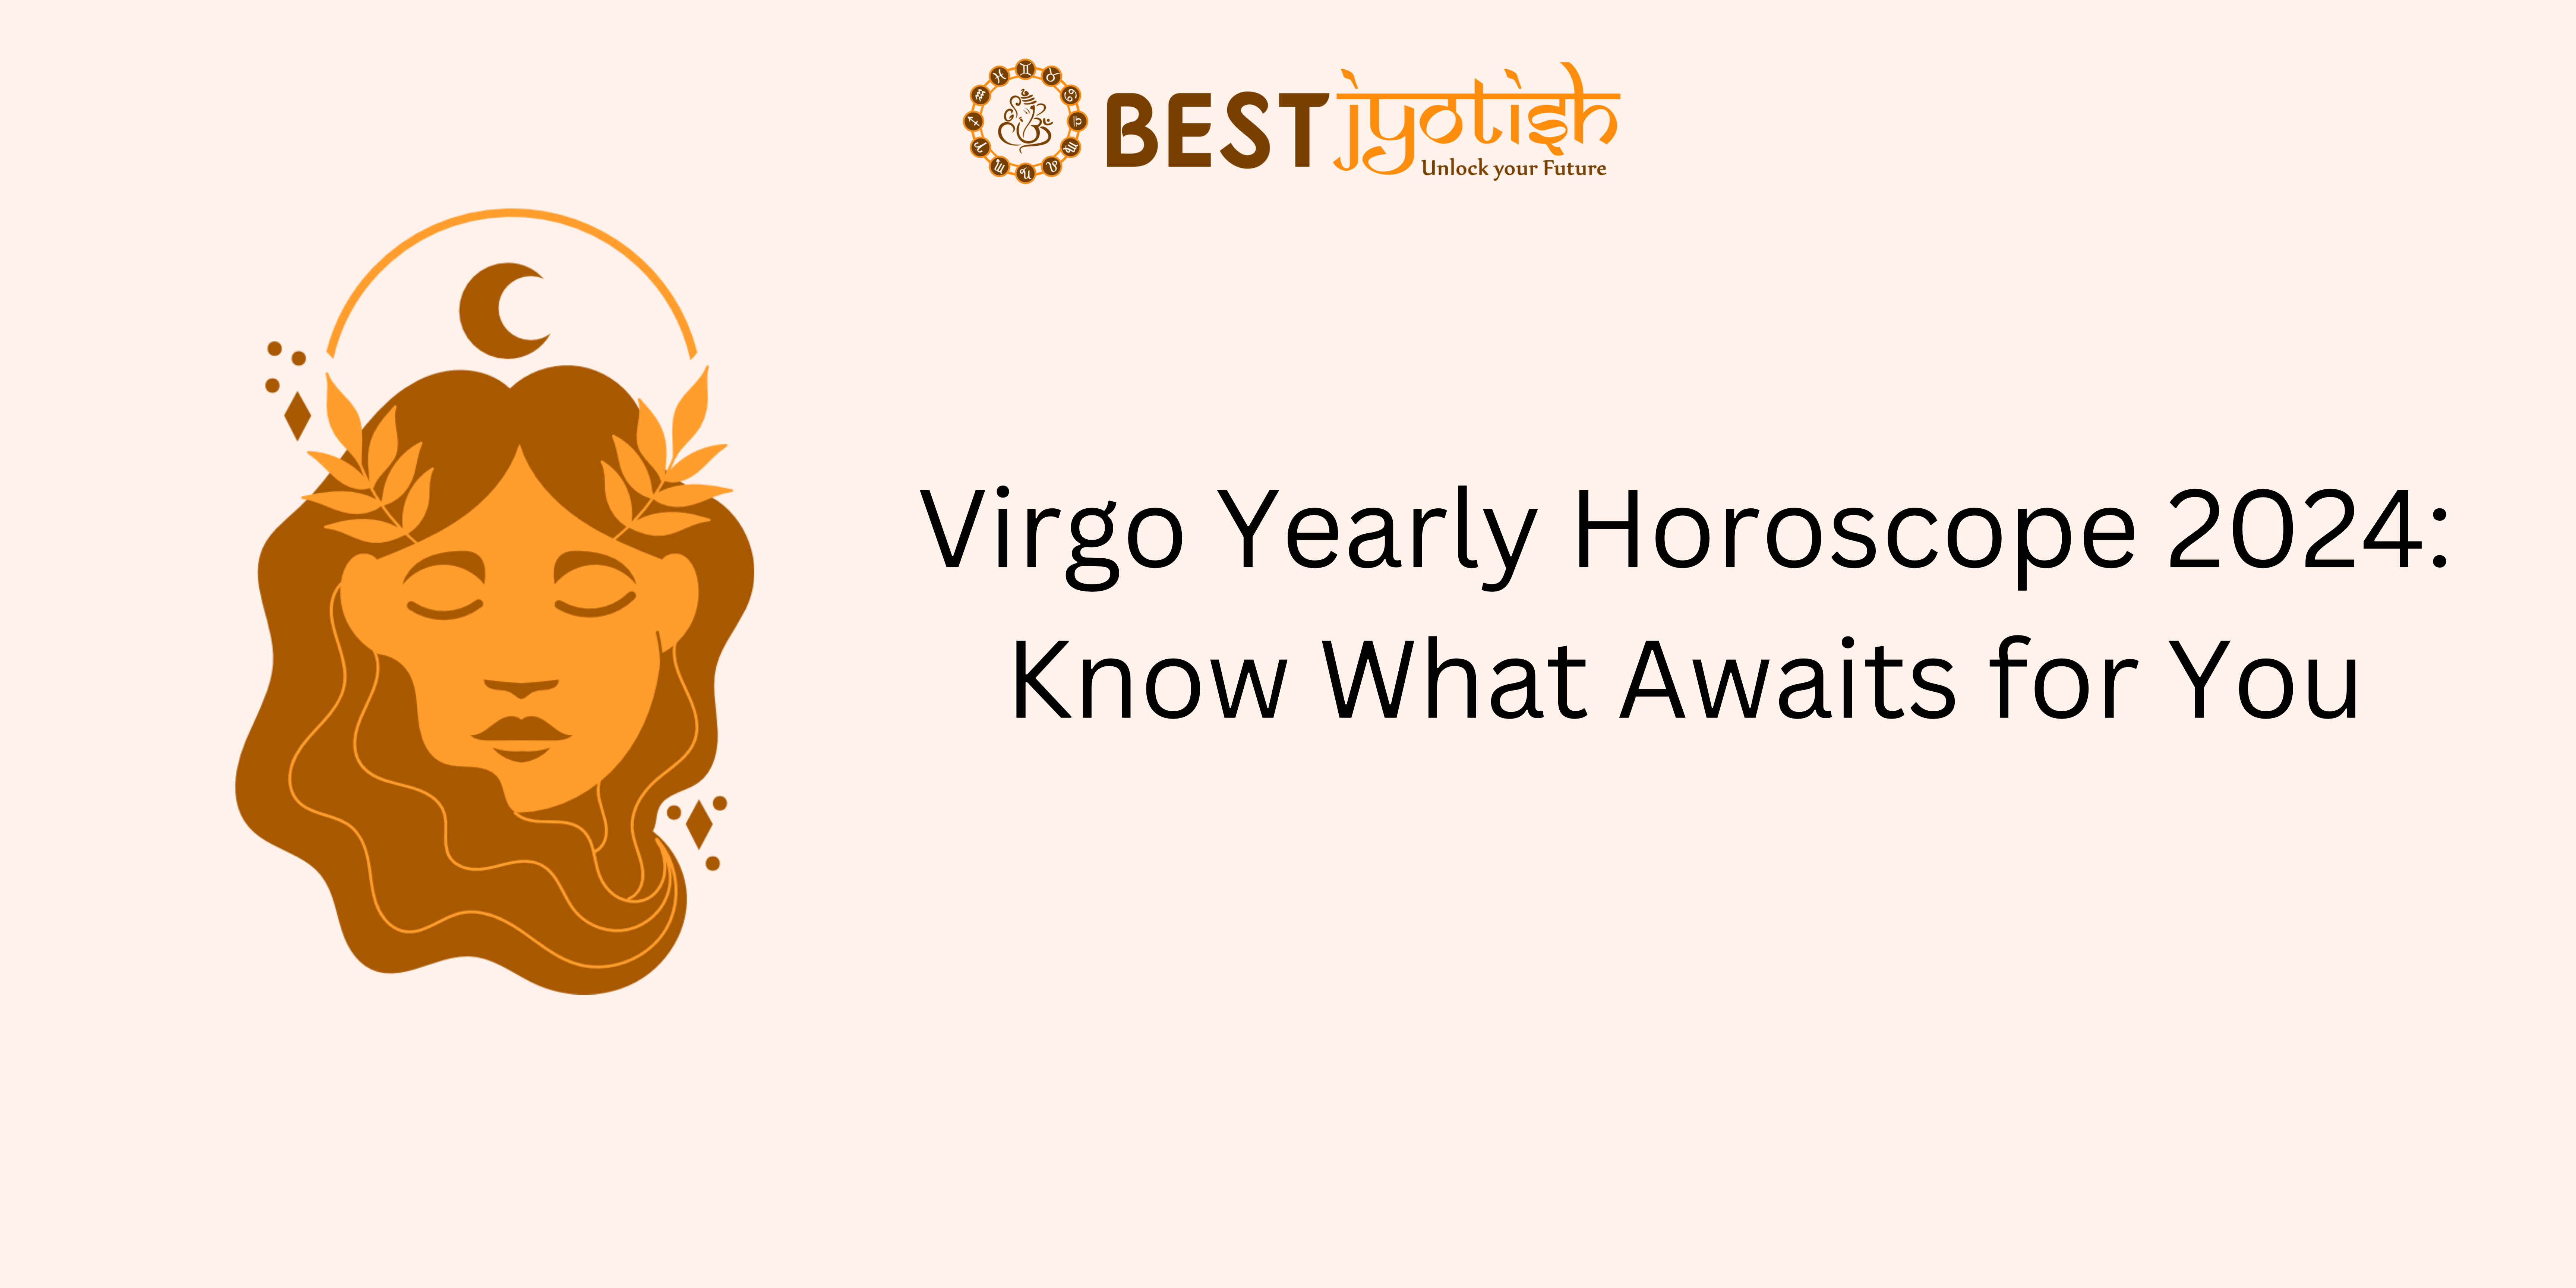 Virgo Yearly Horoscope 2024: Know What Awaits for You